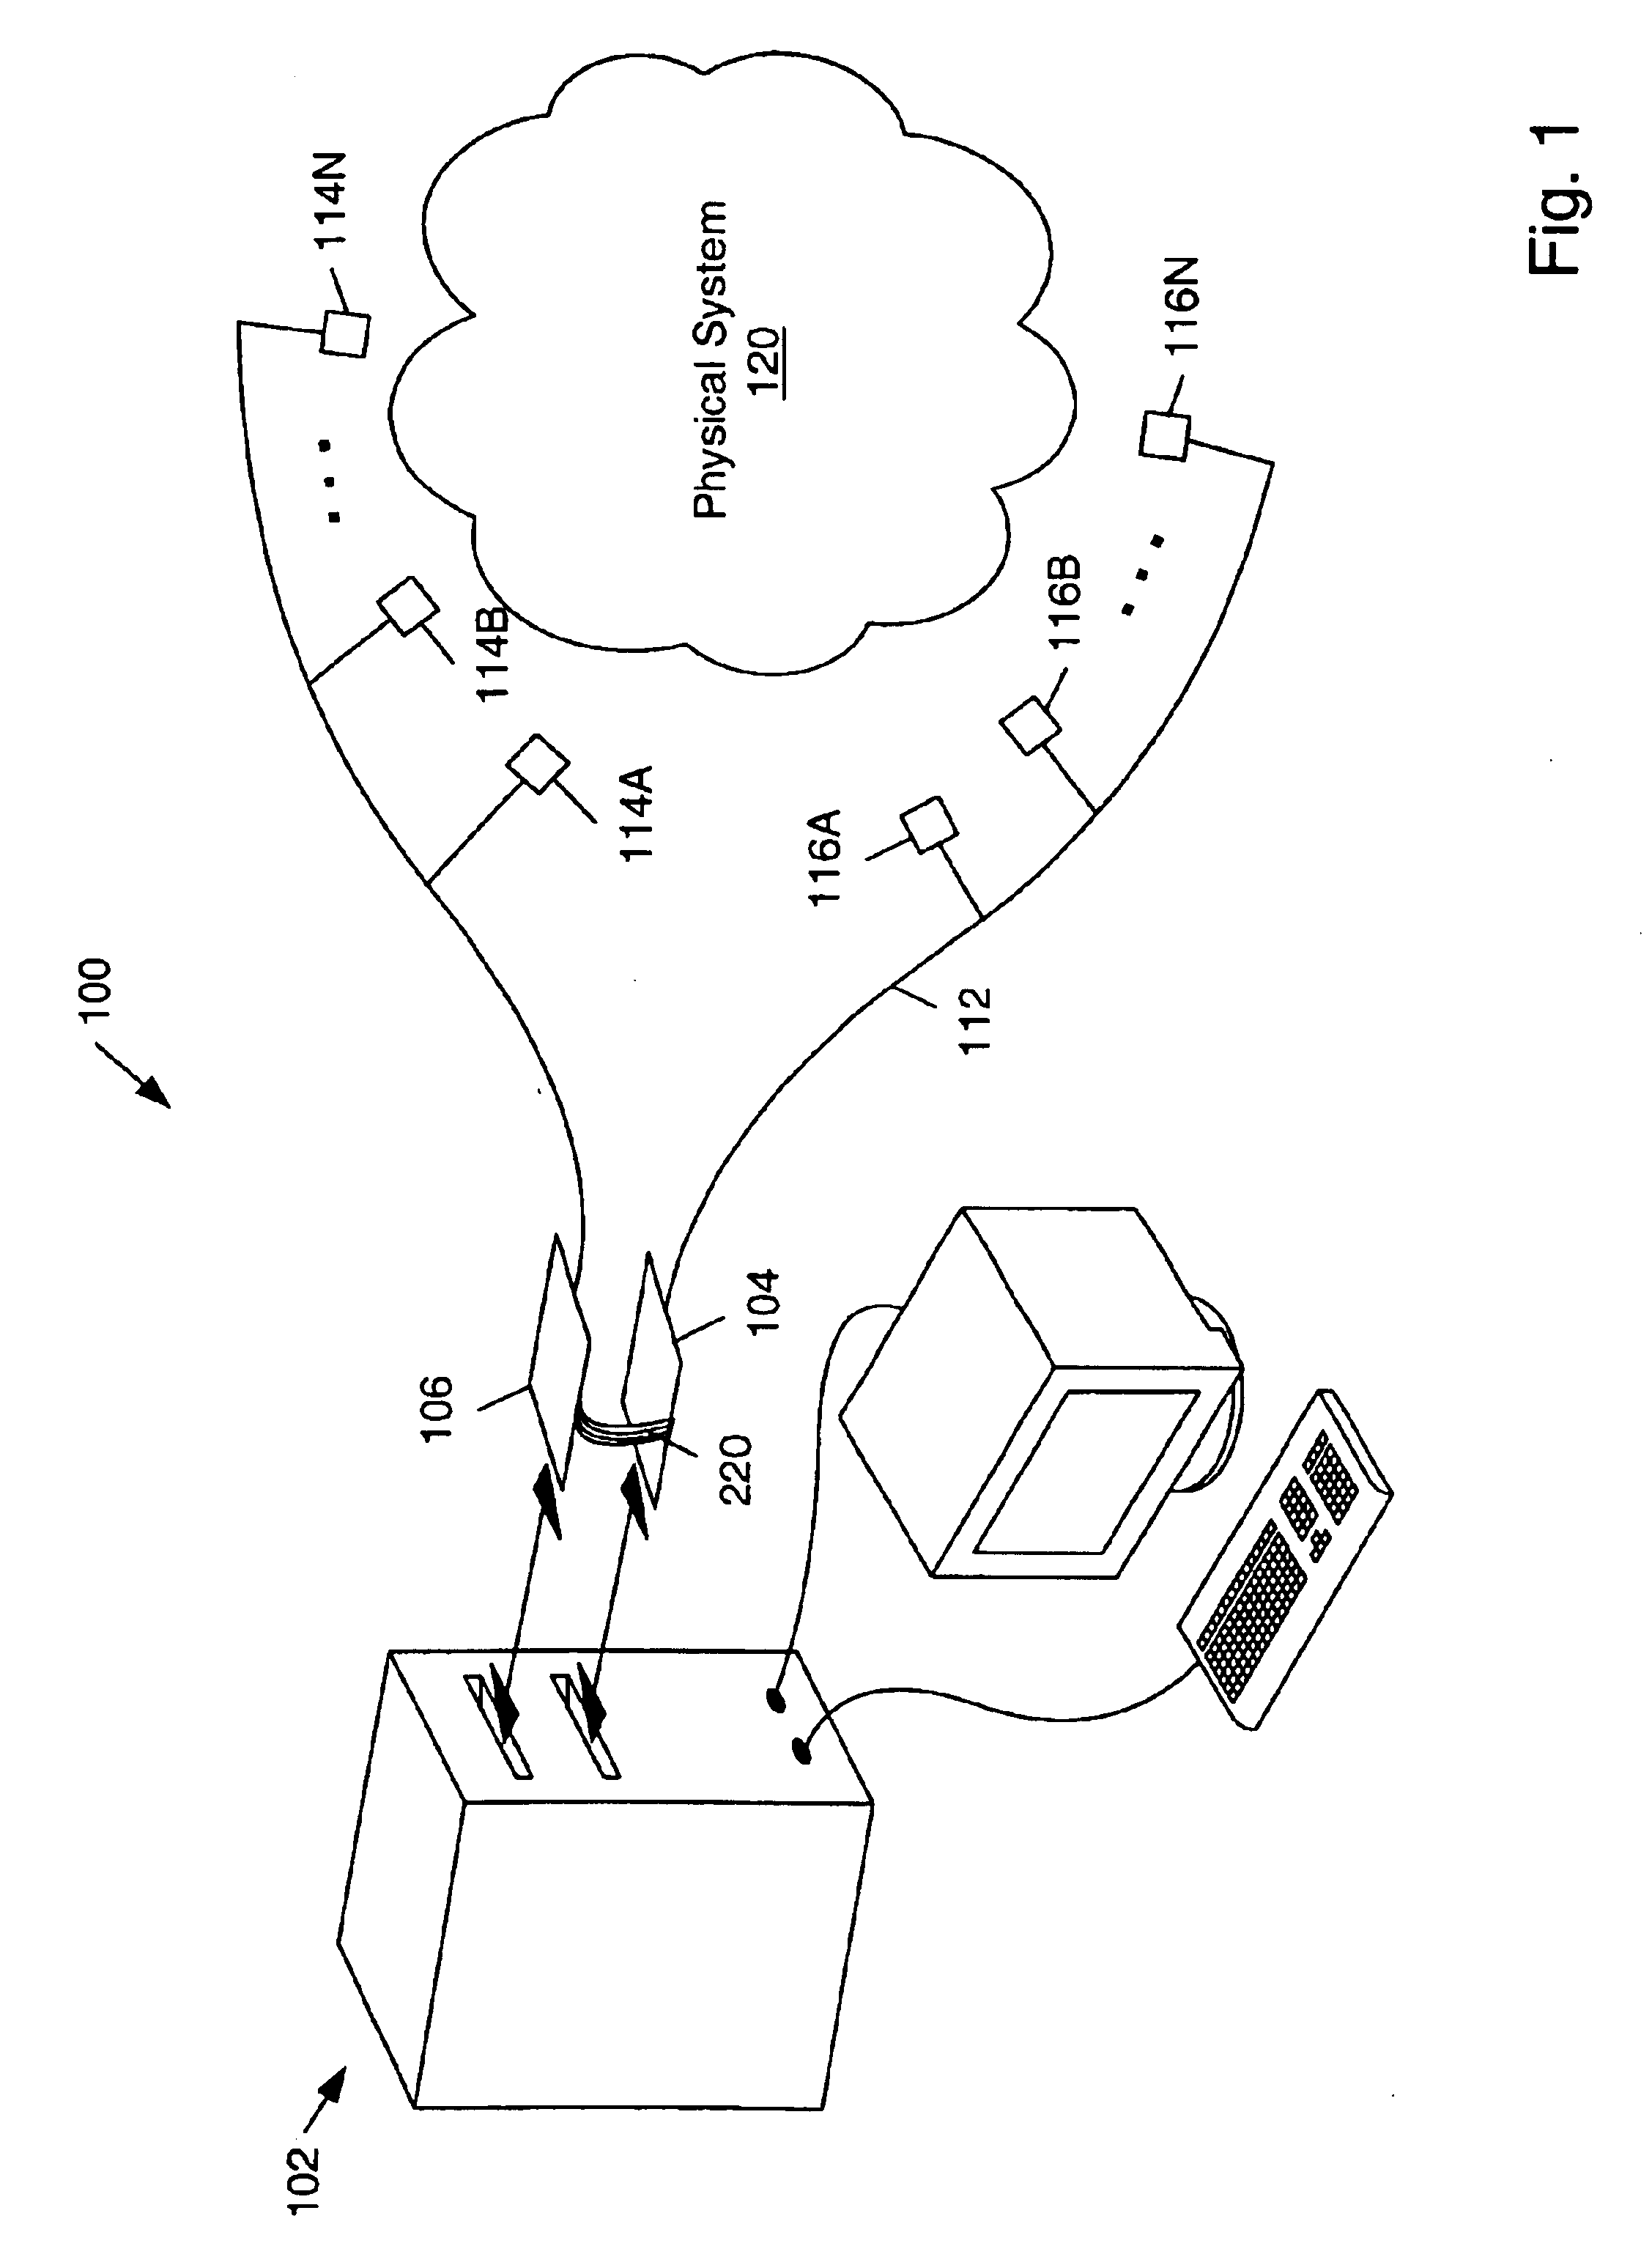 System and method for interfacing a CAN device and a peripheral device